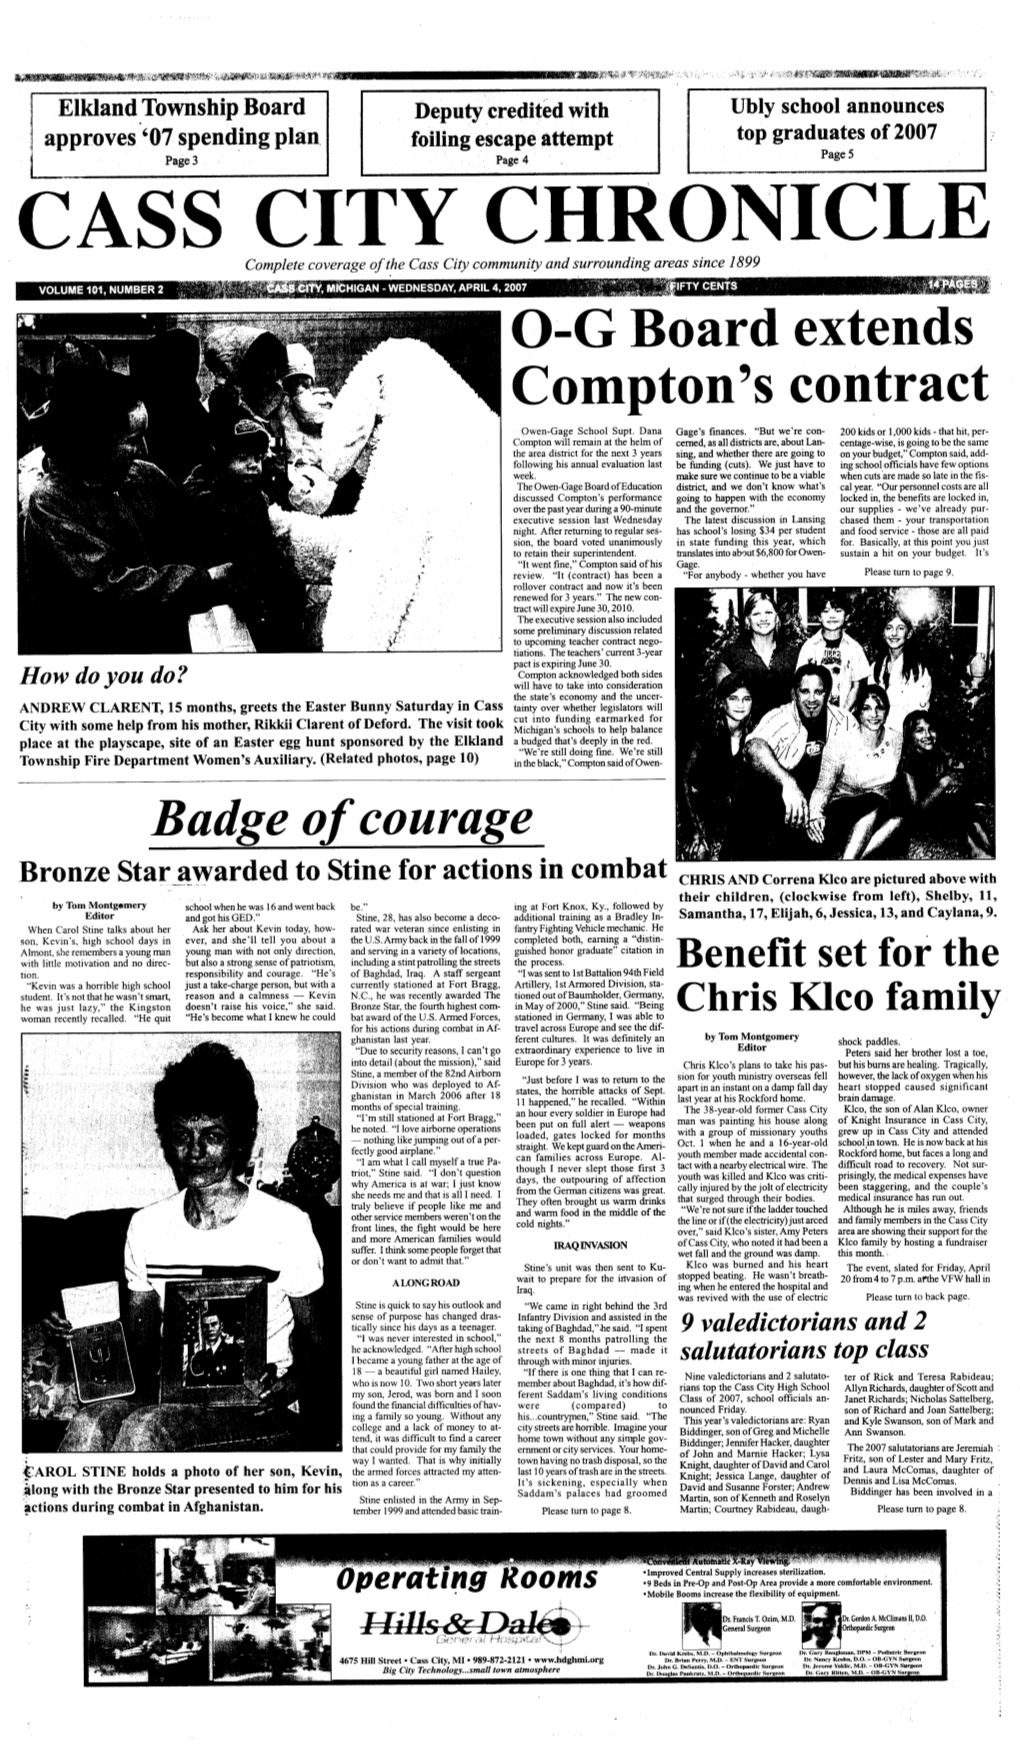 CASS CITY CHRONICLE Complete Coverage-- of the Cuss City Community and Surrounding Areas Since I899 0-G Board Extends Compton’S Contract Owen-Gage School Supt